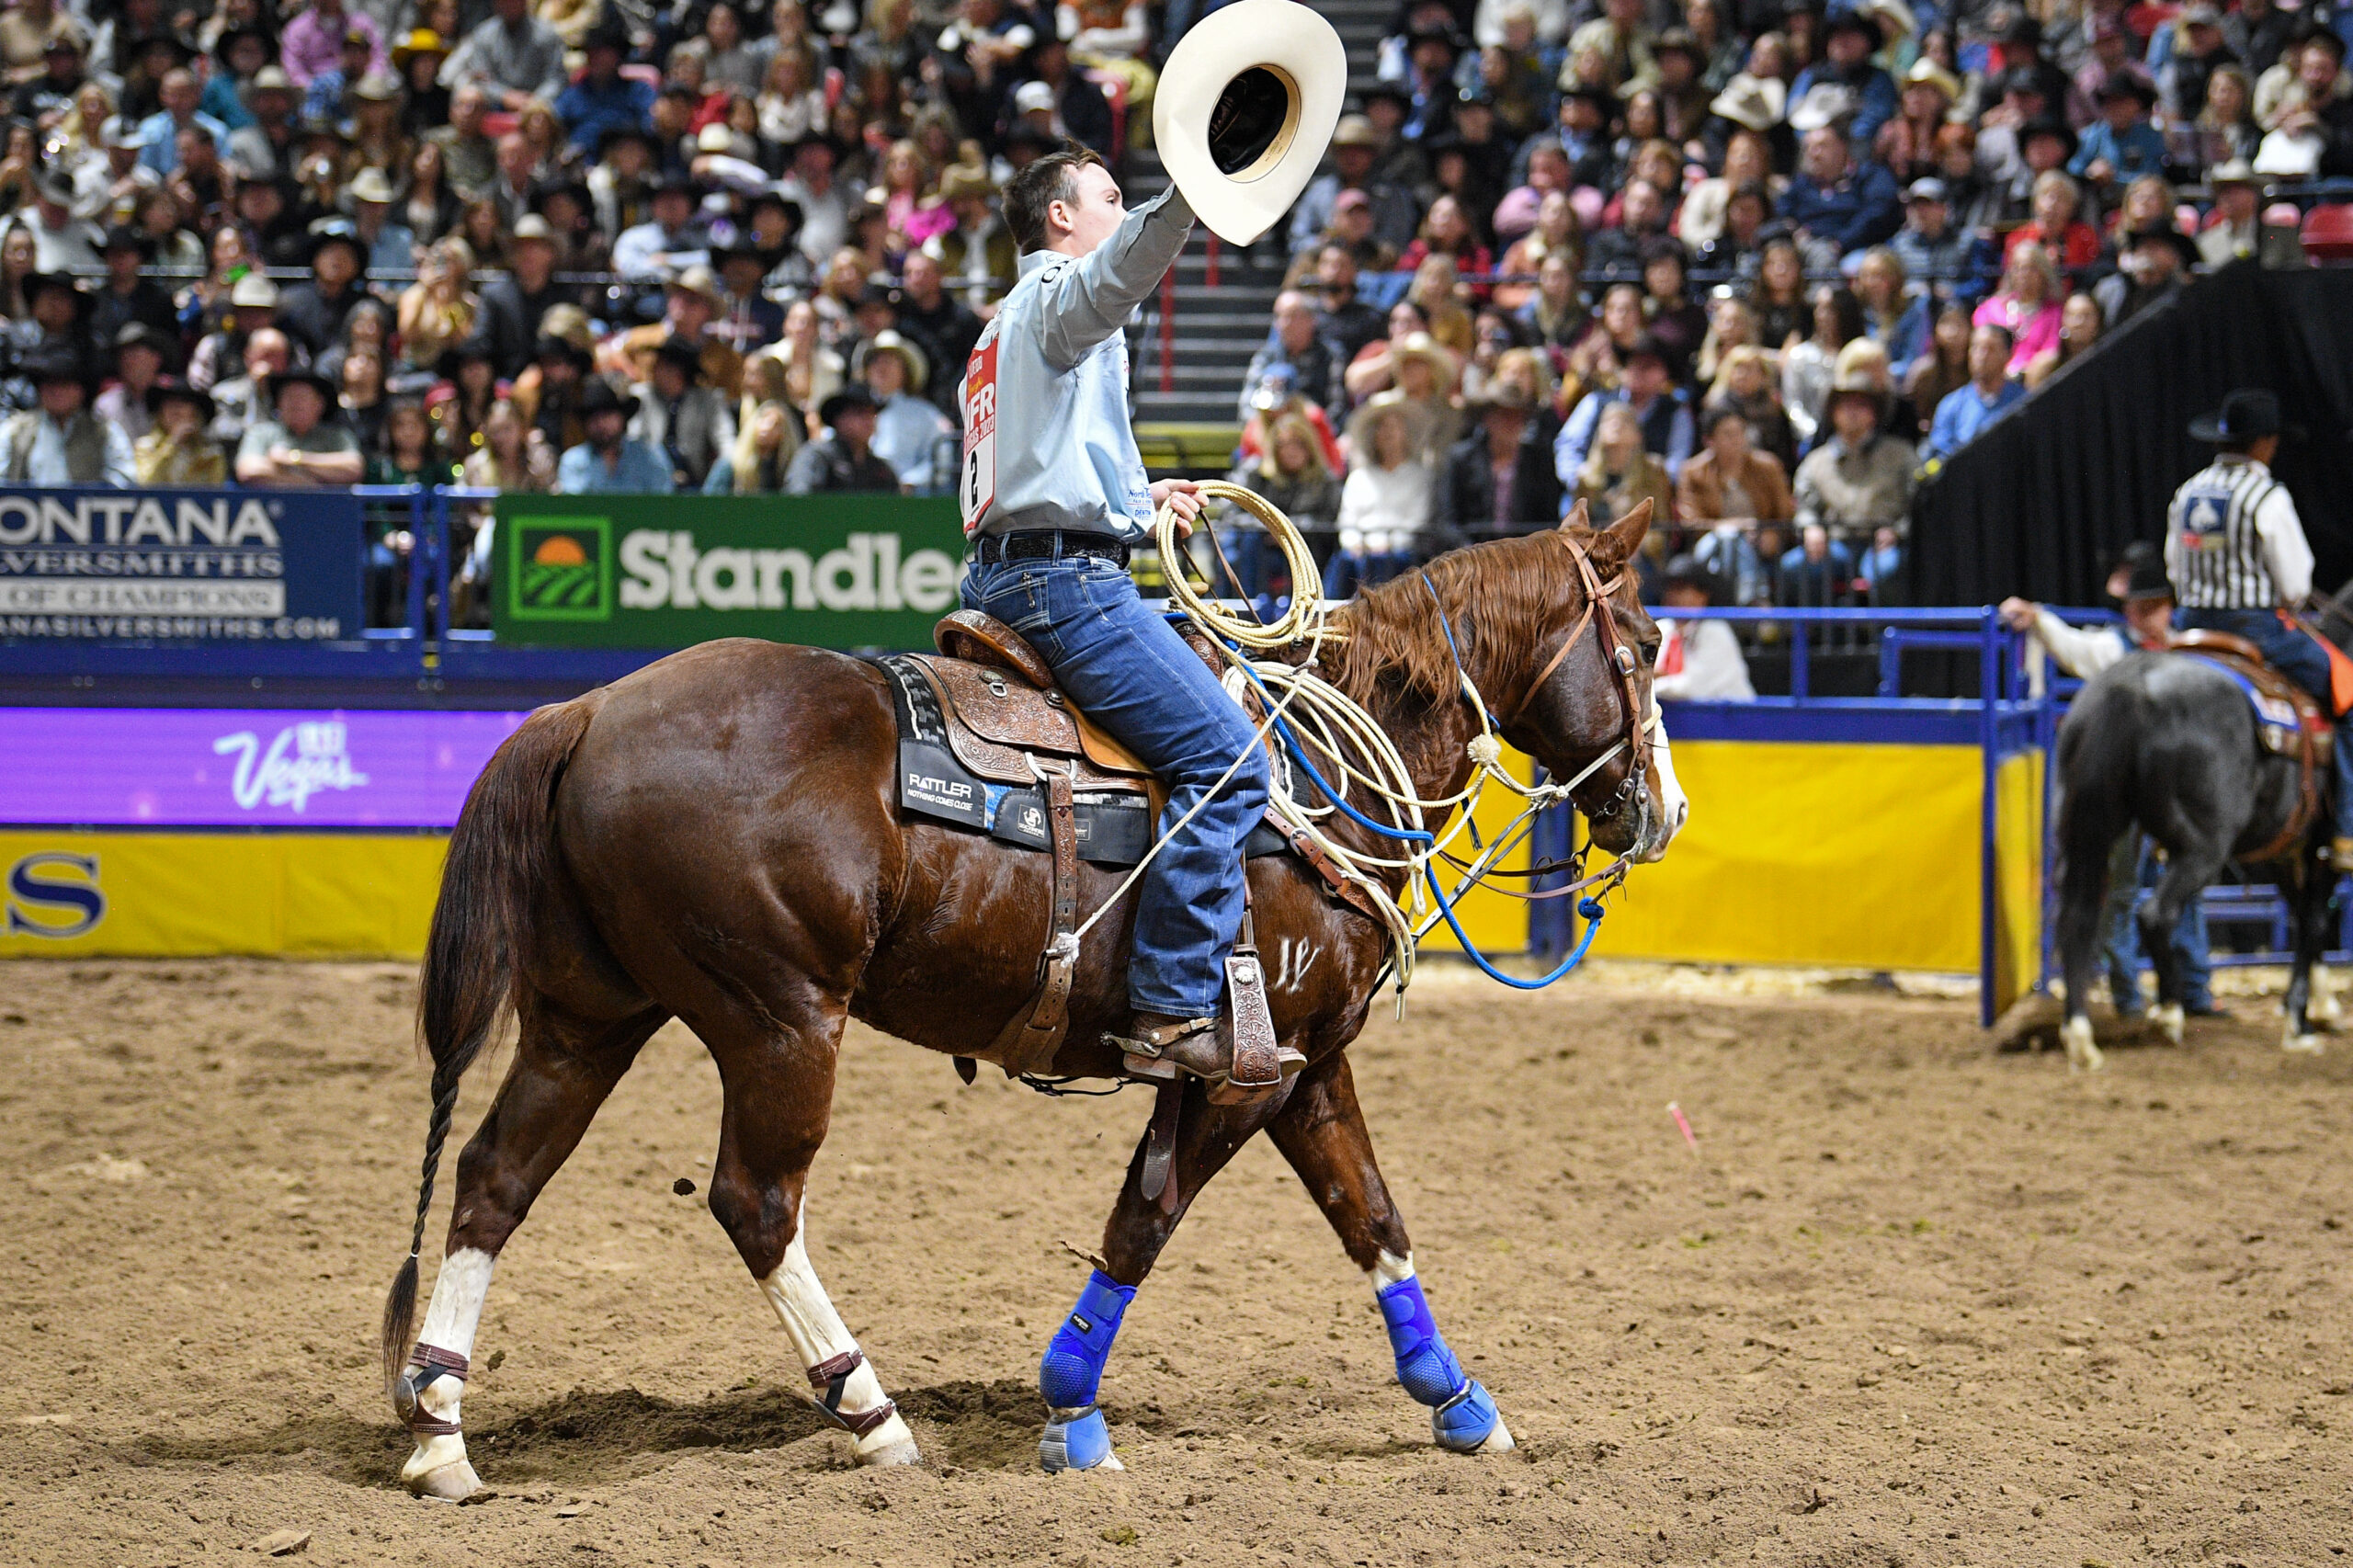 Riley Webb was undeniable throughout the 2023 season and NFR, winning more than $450,000.